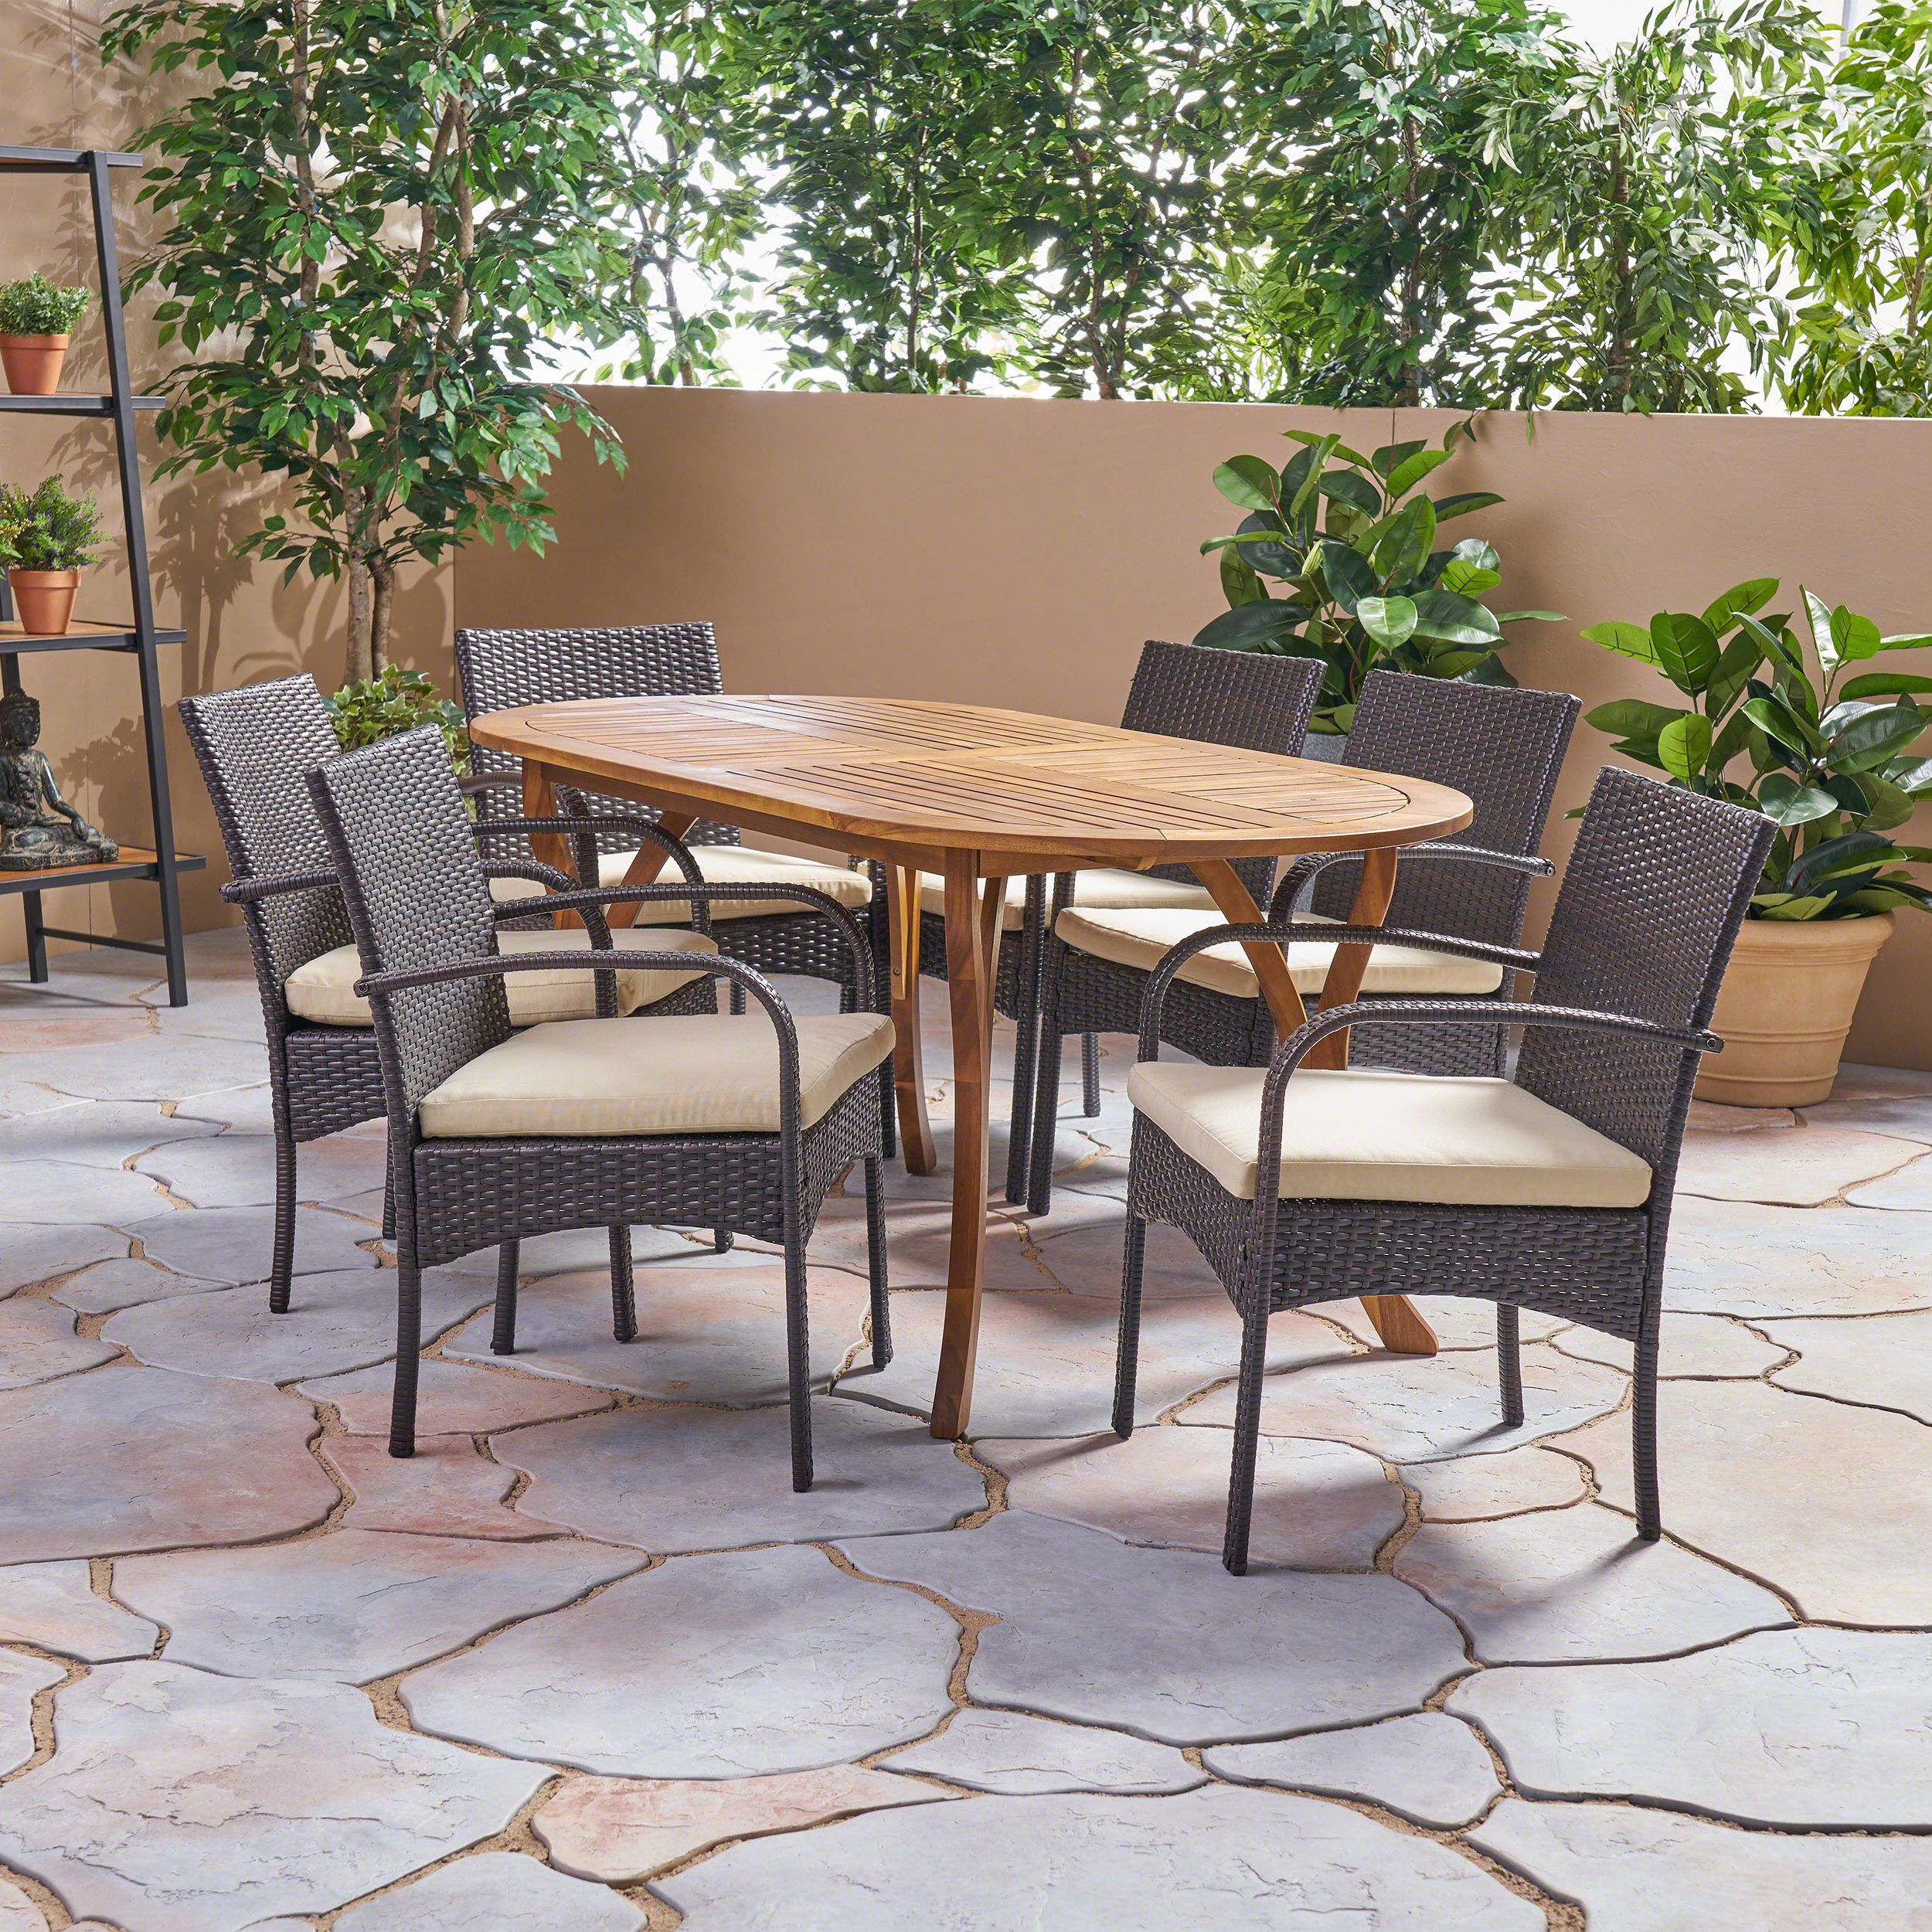 Fashionable Teak Wicker Outdoor Dining Sets Intended For Nathan Outdoor 7 Piece Acacia Wood And Stacking Wicker Dining Set, Teak (View 1 of 15)